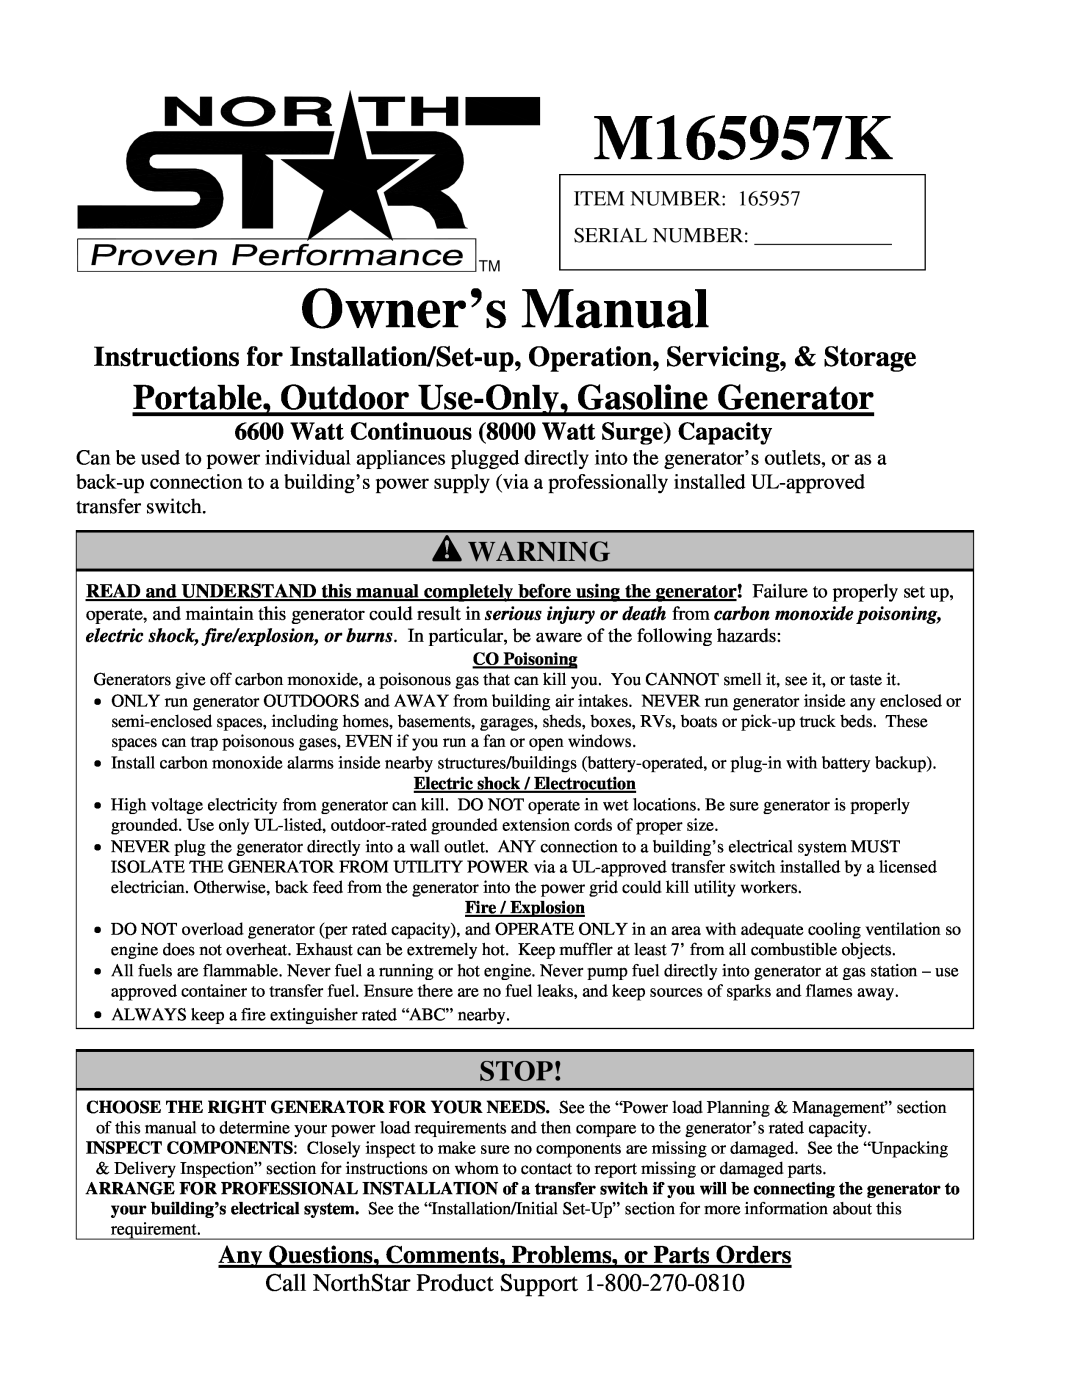 North Star M165957K owner manual Instructions for Installation/Set-up, Operation, Servicing, & Storage, Stop, CO Poisoning 